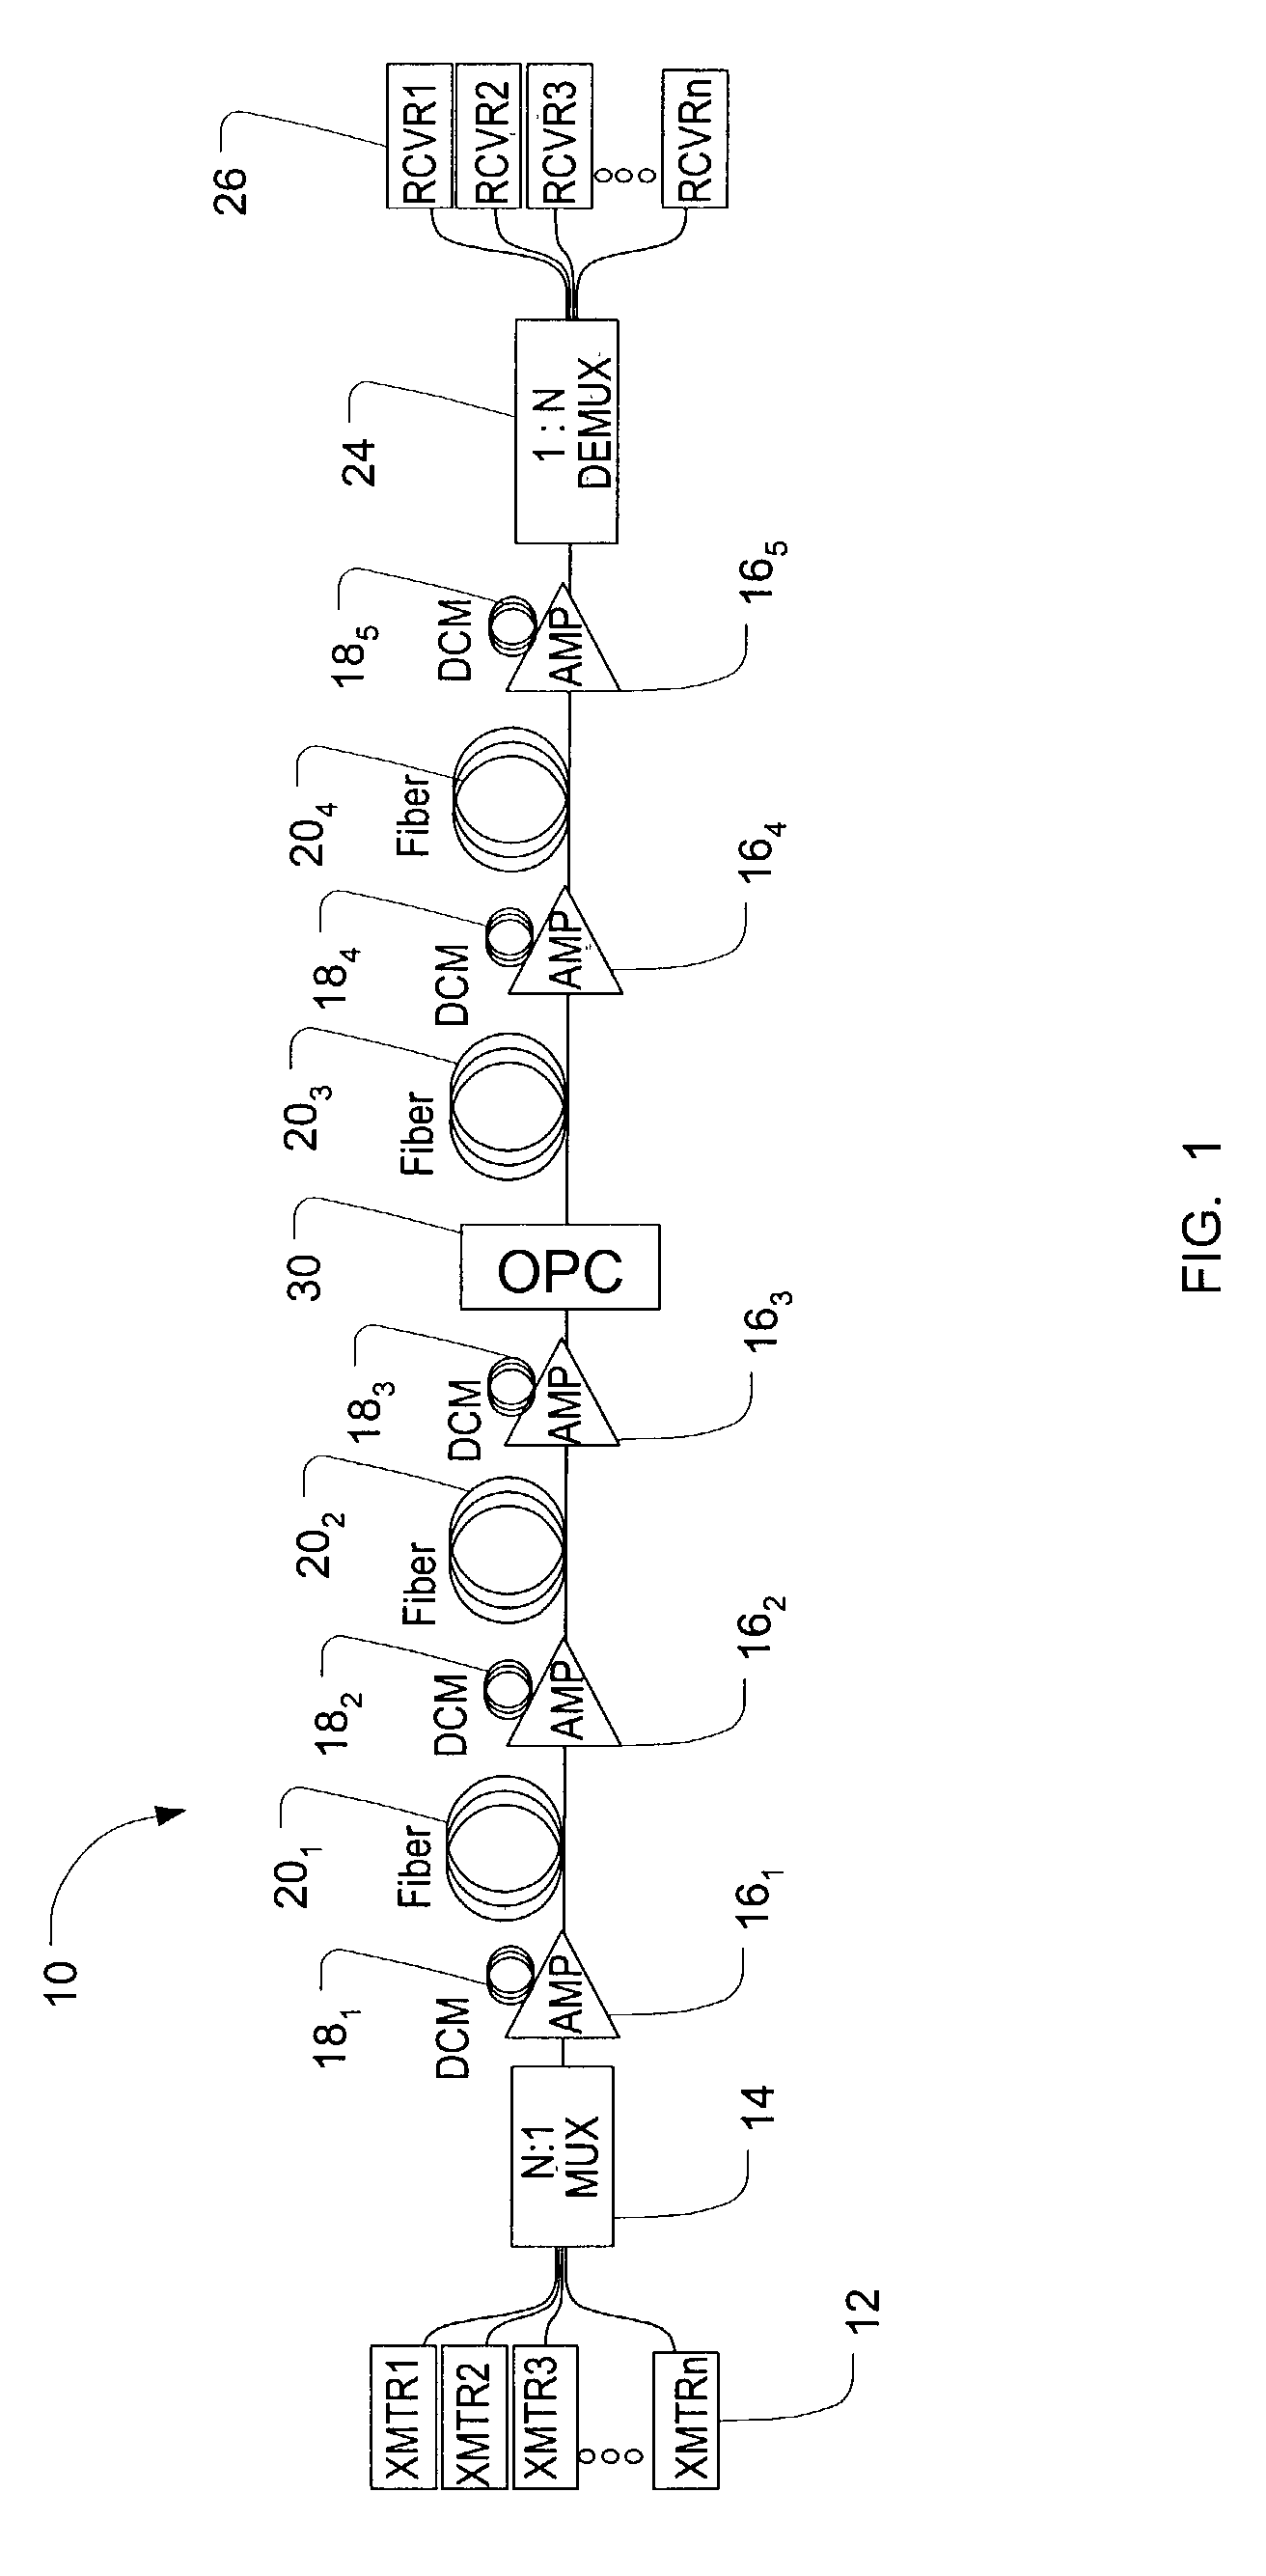 Method and system for using optical phase conjugation in an optical communications network including an add/drop multiplexer